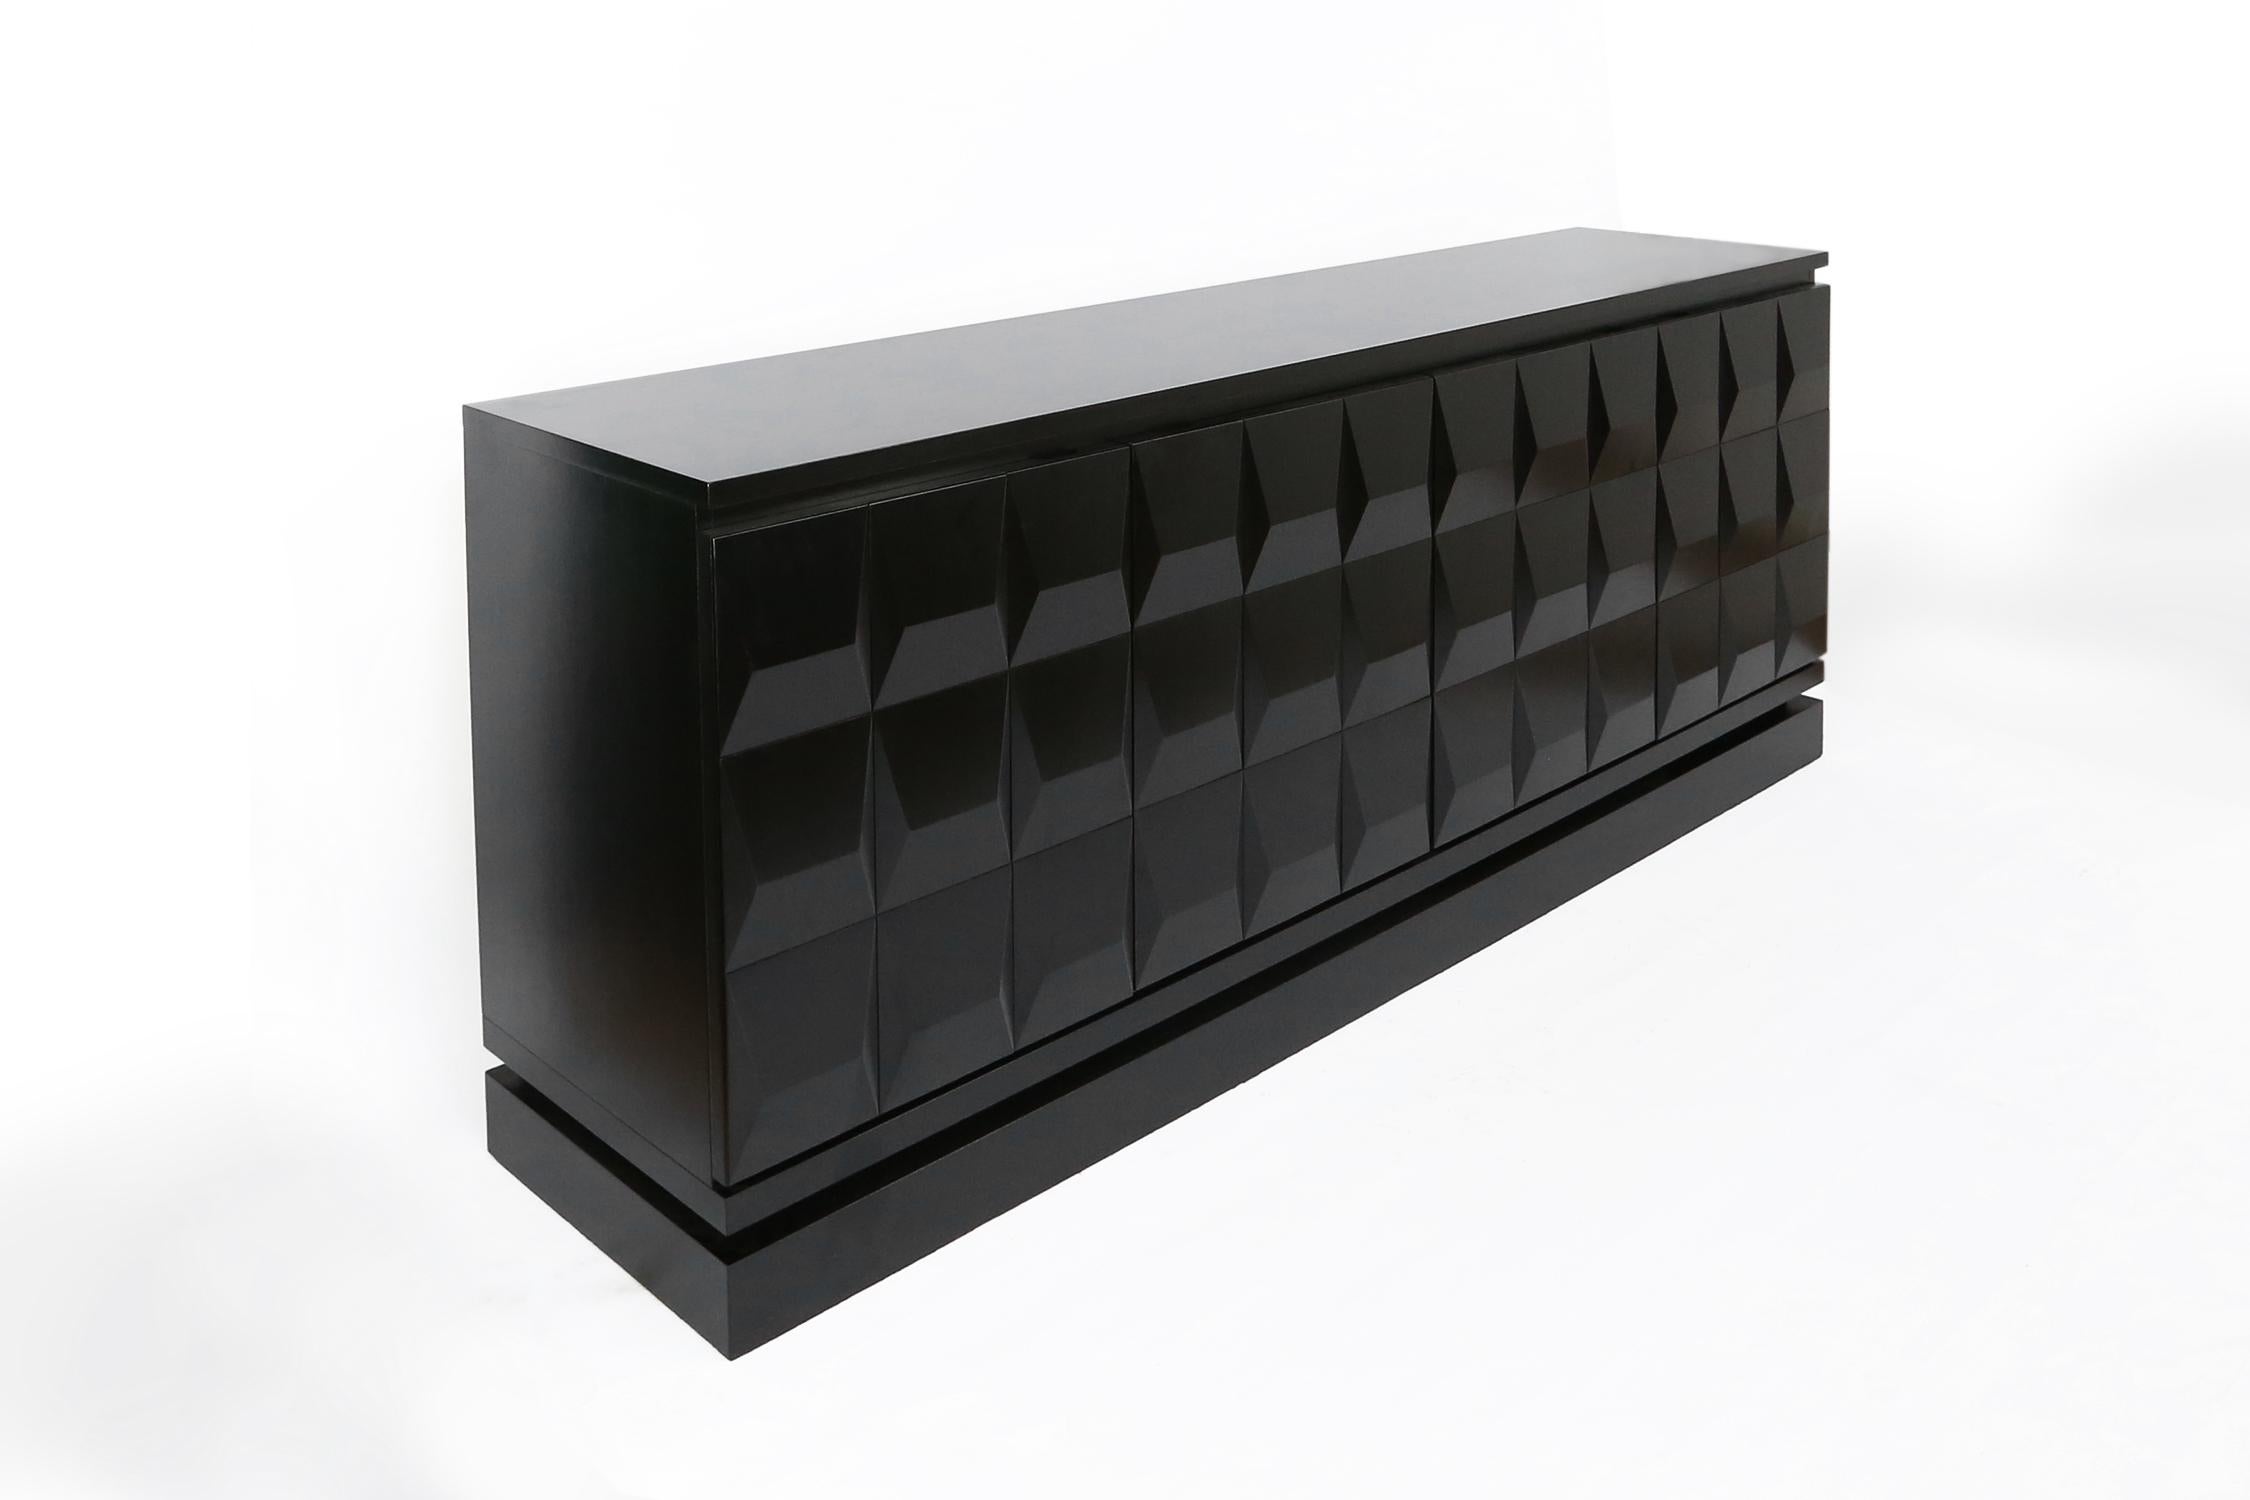 Impressive brutalist sideboard made in the seventies in Belgium. 
This cabinet has a beautiful graphic pattern and was made in solid ebonized black lacquered mahogany. The high quality wood, symetric design and pattern add to the brutalist